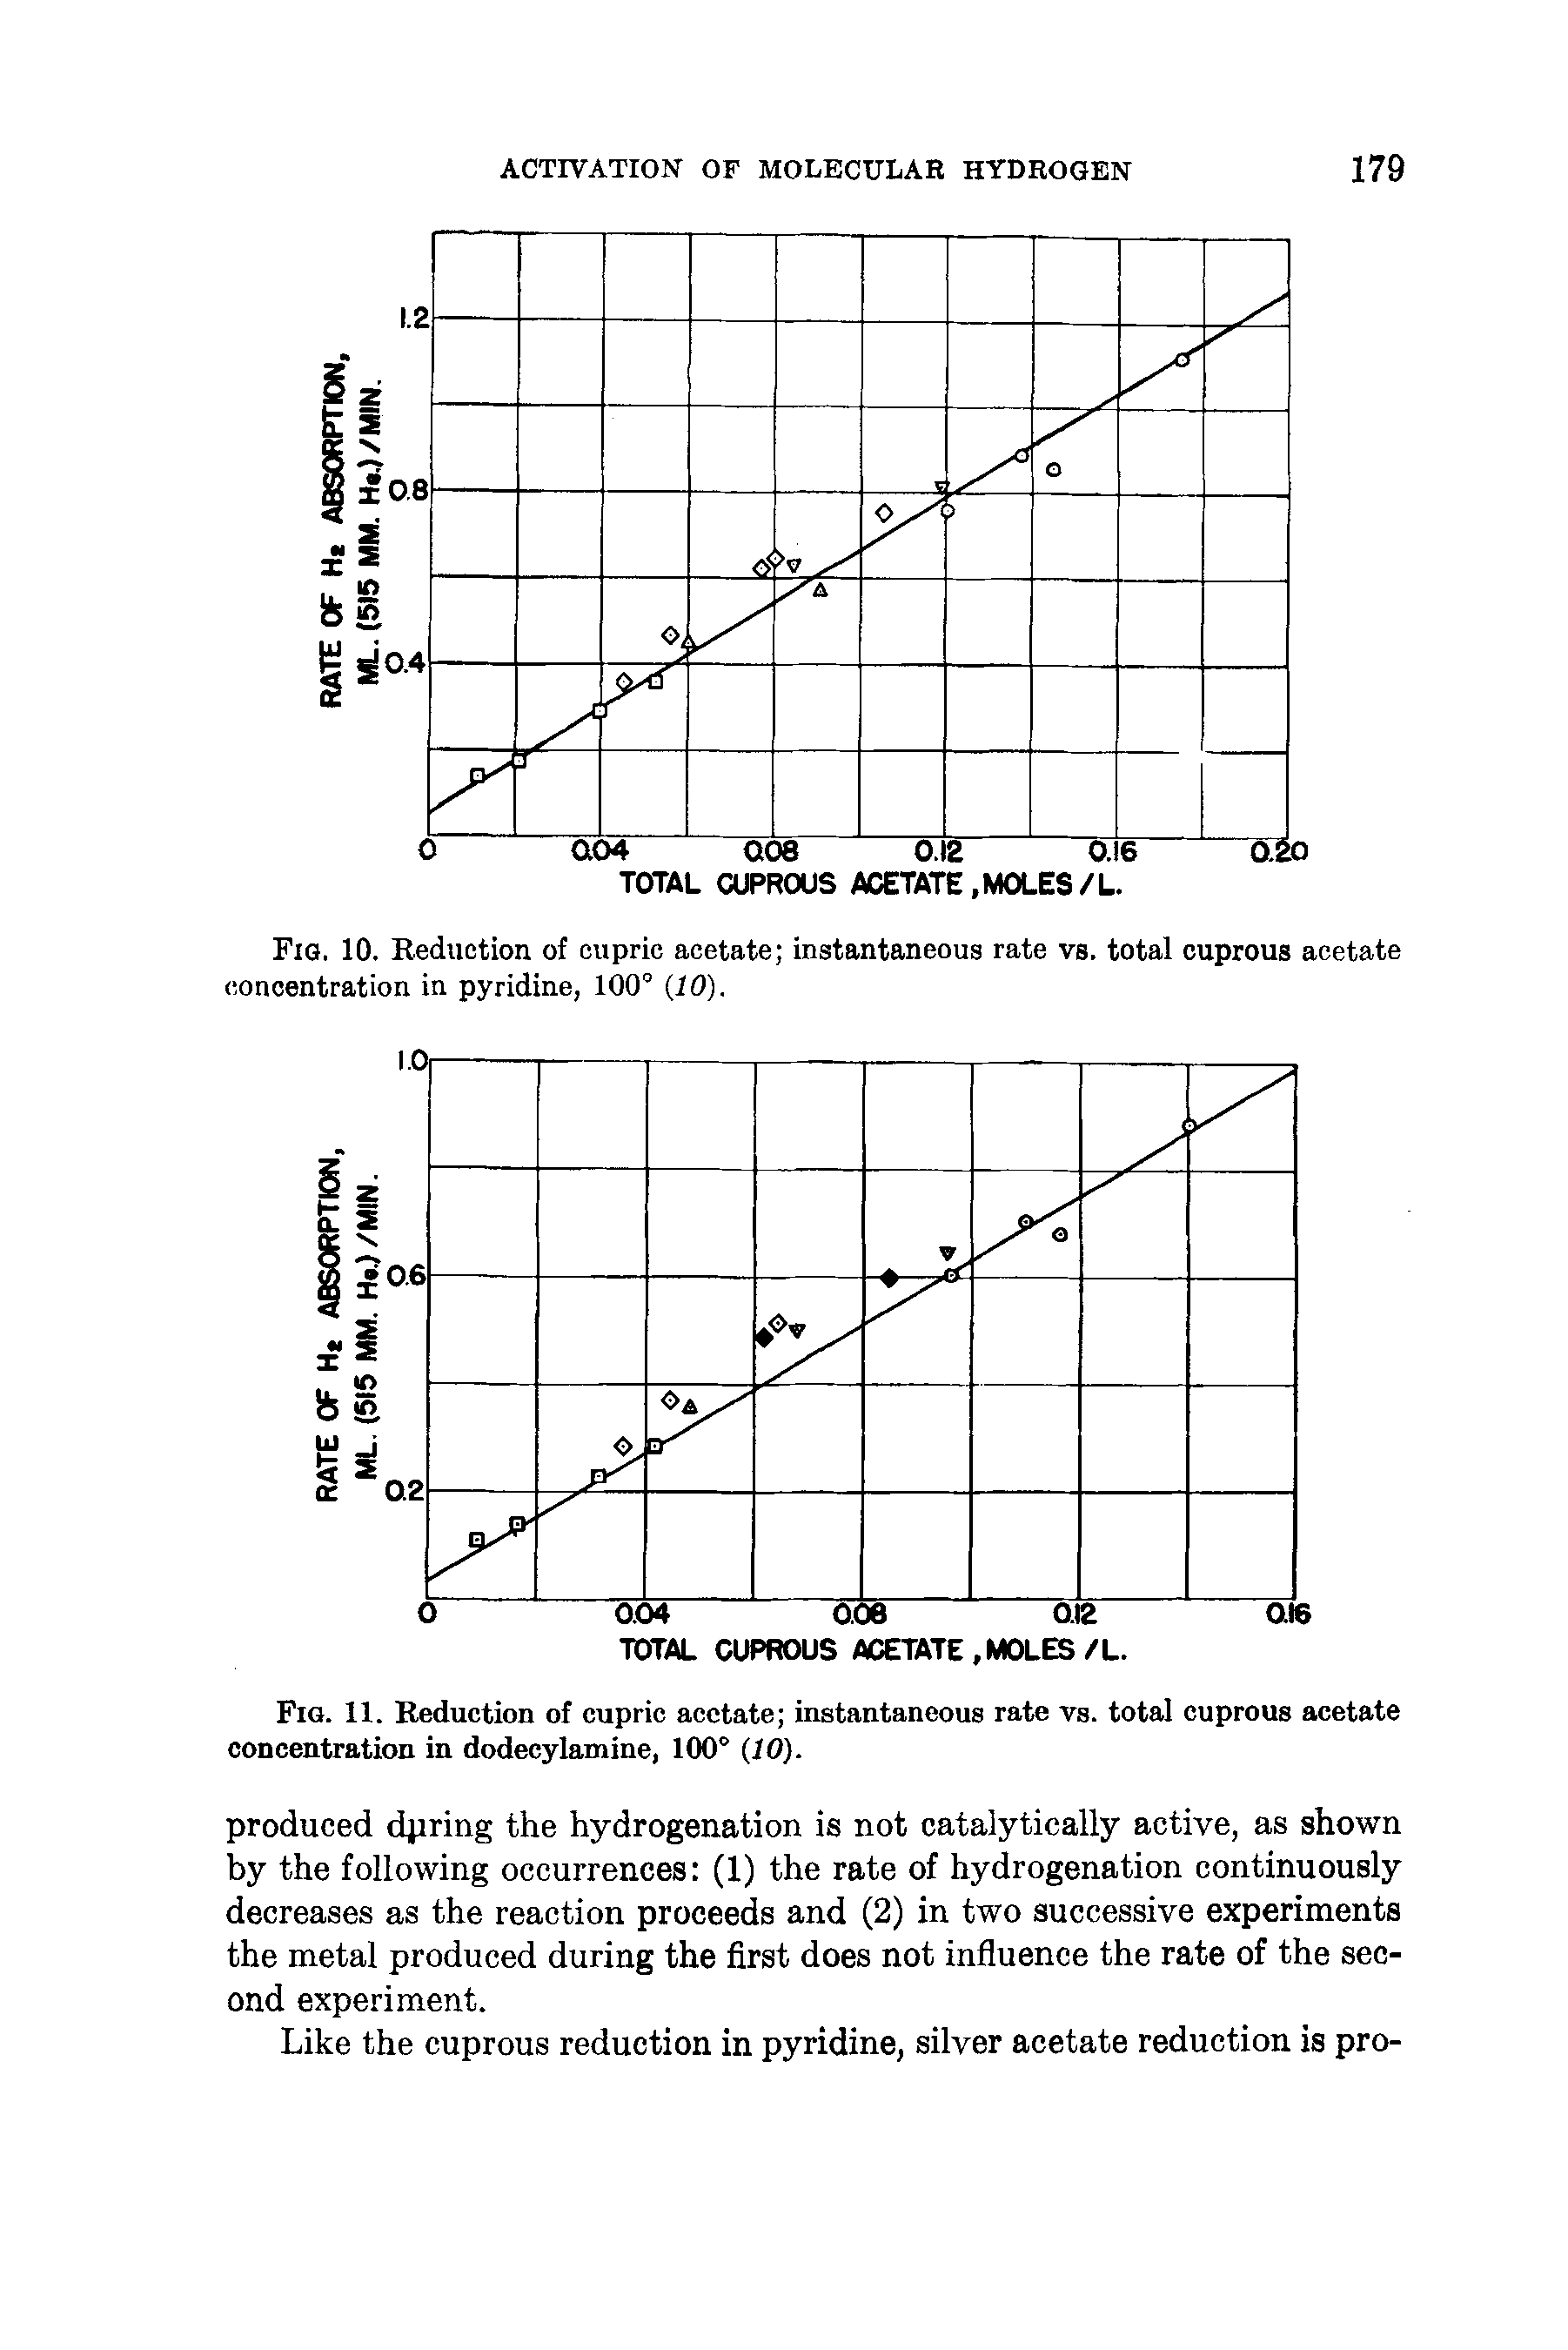 Fig. 10. Reduction of cupric acetate instantaneous rate vs. total cuprous acetate concentration in pyridine, 100° (10).